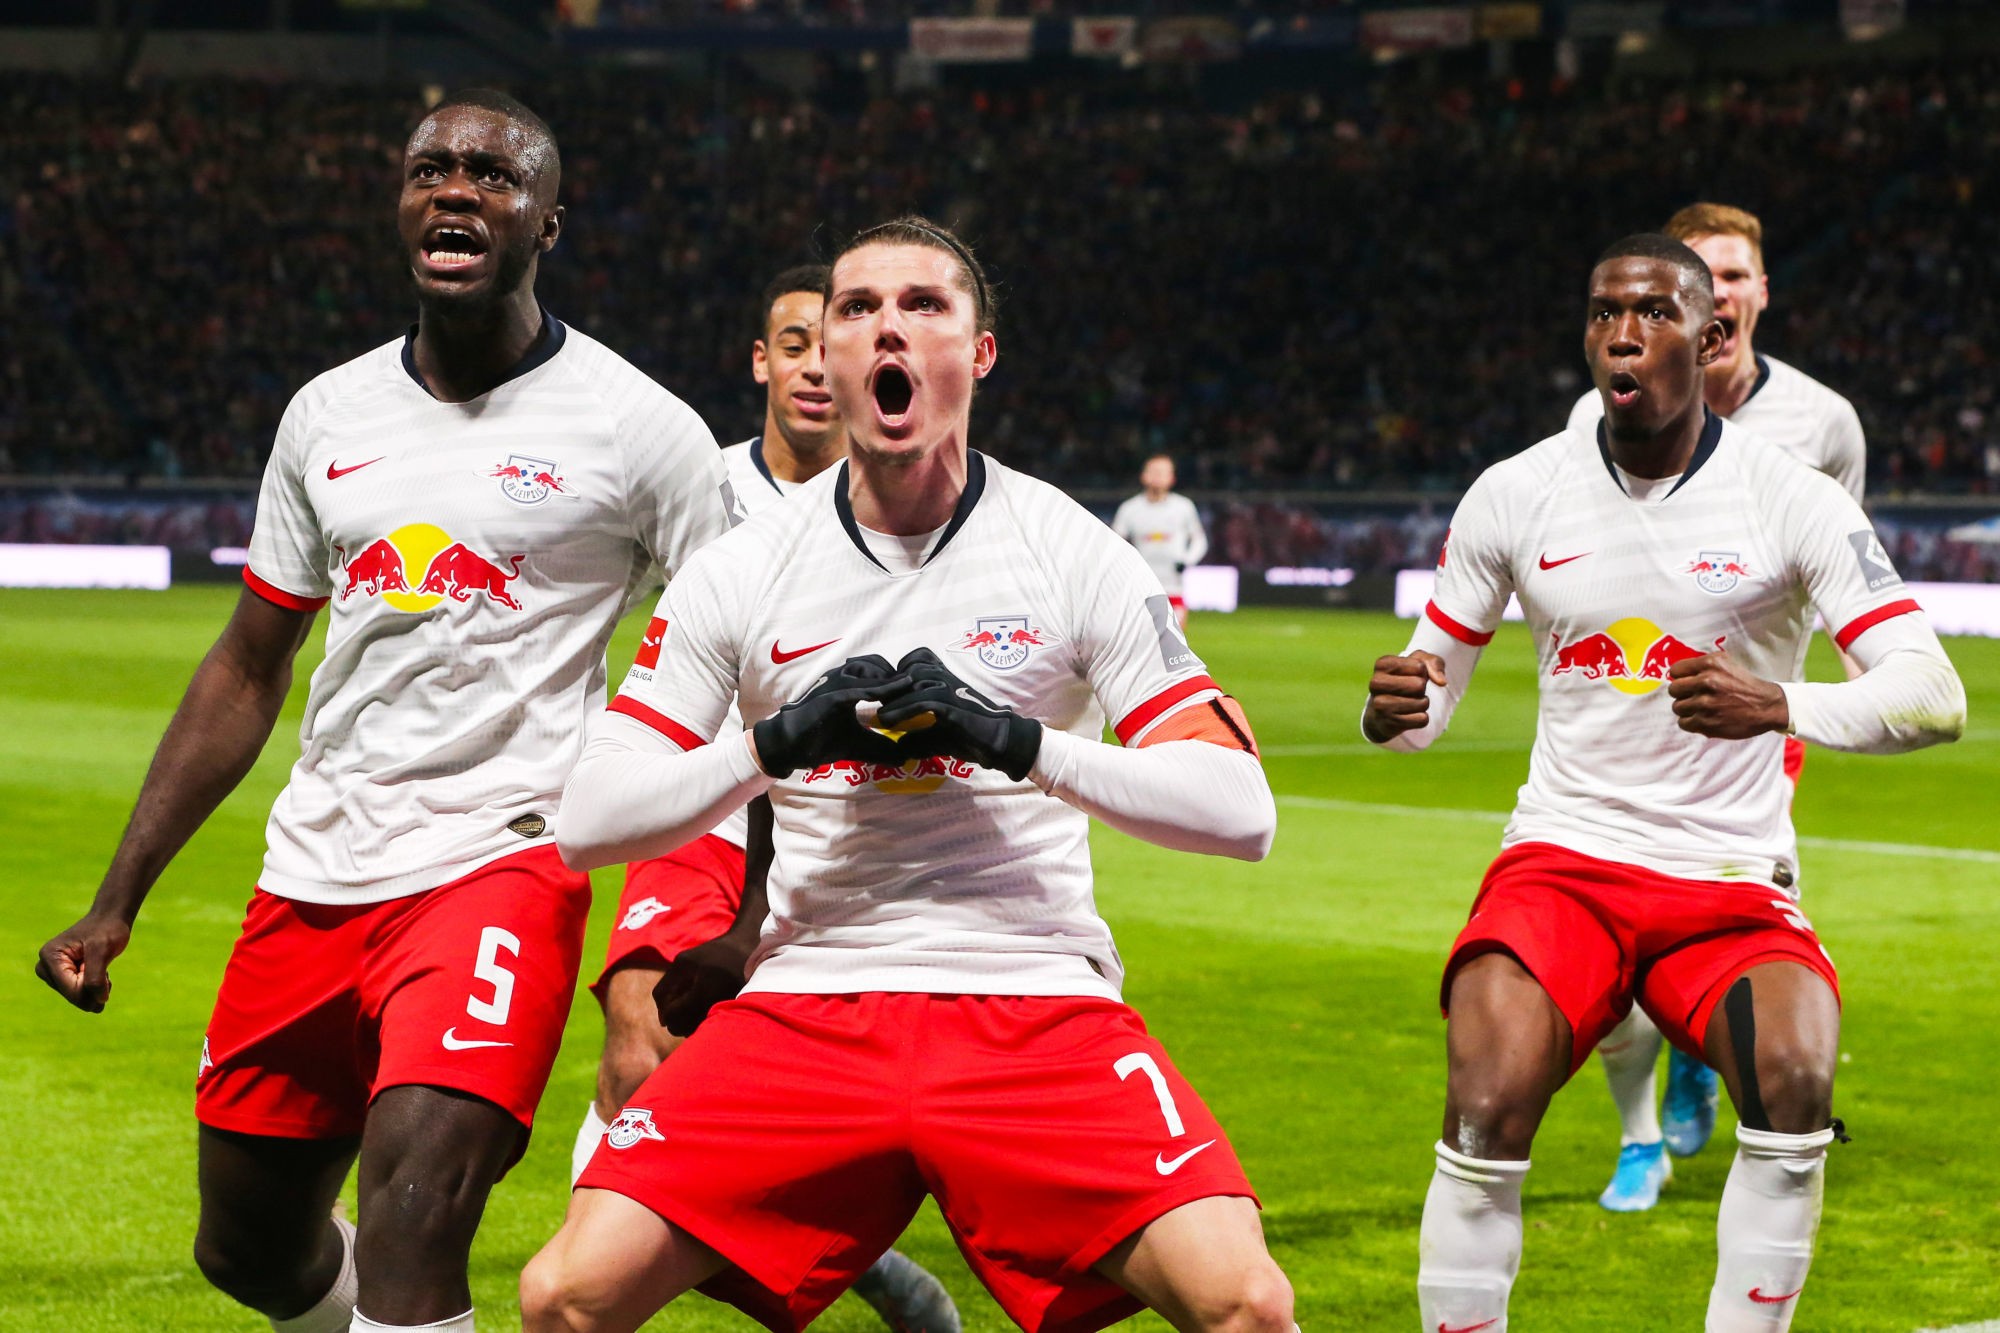 LEIPZIG,GERMANY,18.JAN.20 - SOCCER - 1. DFL, 1. Deutsche Bundesliga, RasenBallsport Leipzig vs Union Berlin. Image shows the rejoicing of Dayot Upamecano, Marcel Sabitzer and Nordi Mukiele (RB Leipzig). Photo: GEPA pictures/ Sven Sonntag - ATTENTION - DFL regulations prohibit any use of photographs as image sequences and/or quasi-video 
Photo by Icon Sport - Nordi MUKIELE - Marcel SABITZER - Dayot UPAMECANO - Red Bull Arena - Leipzig (Allemagne)